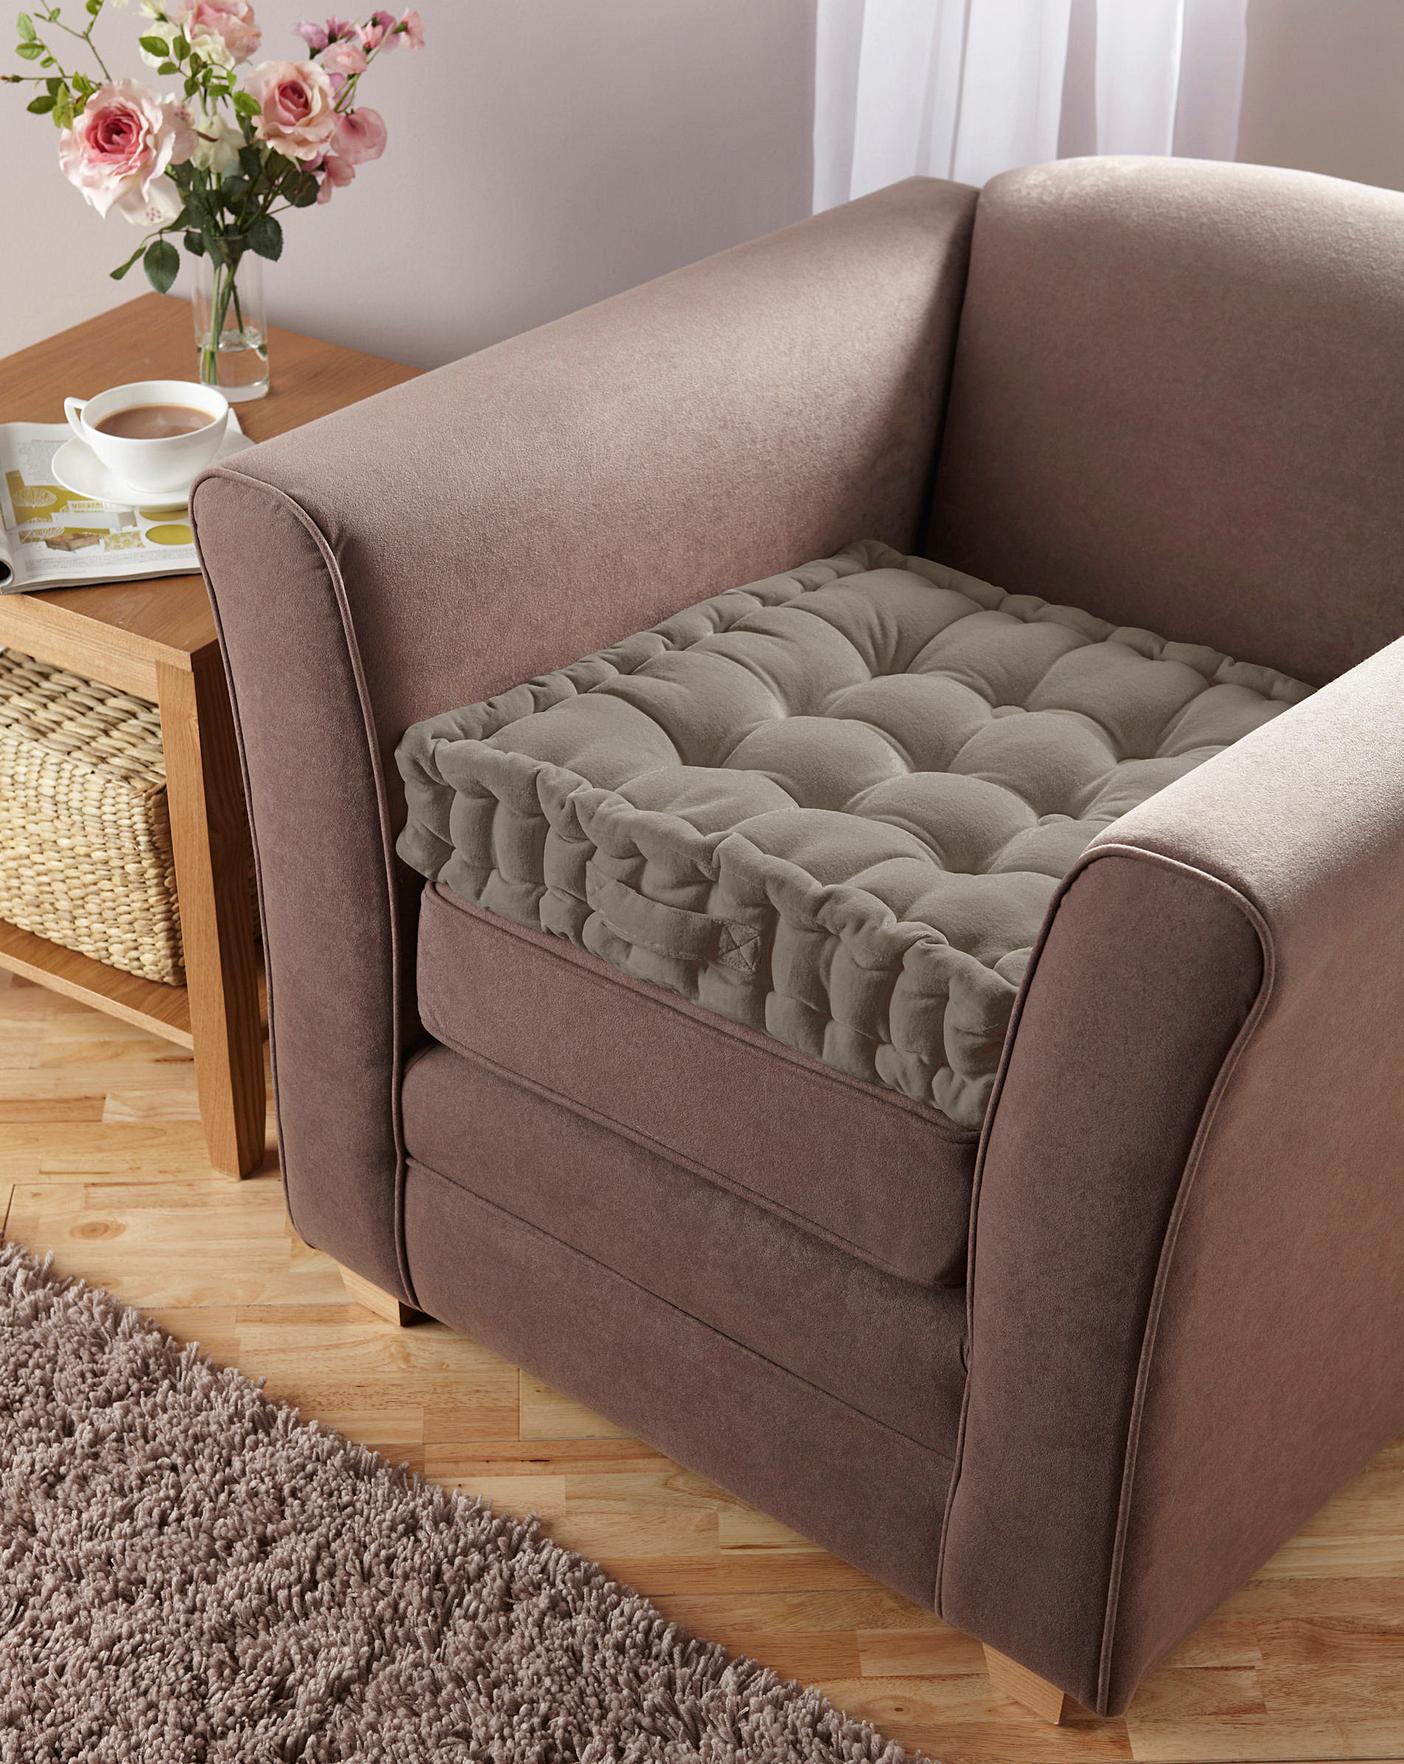 Armchair Booster Cushions For The Elderly / Geling Brown Armchair